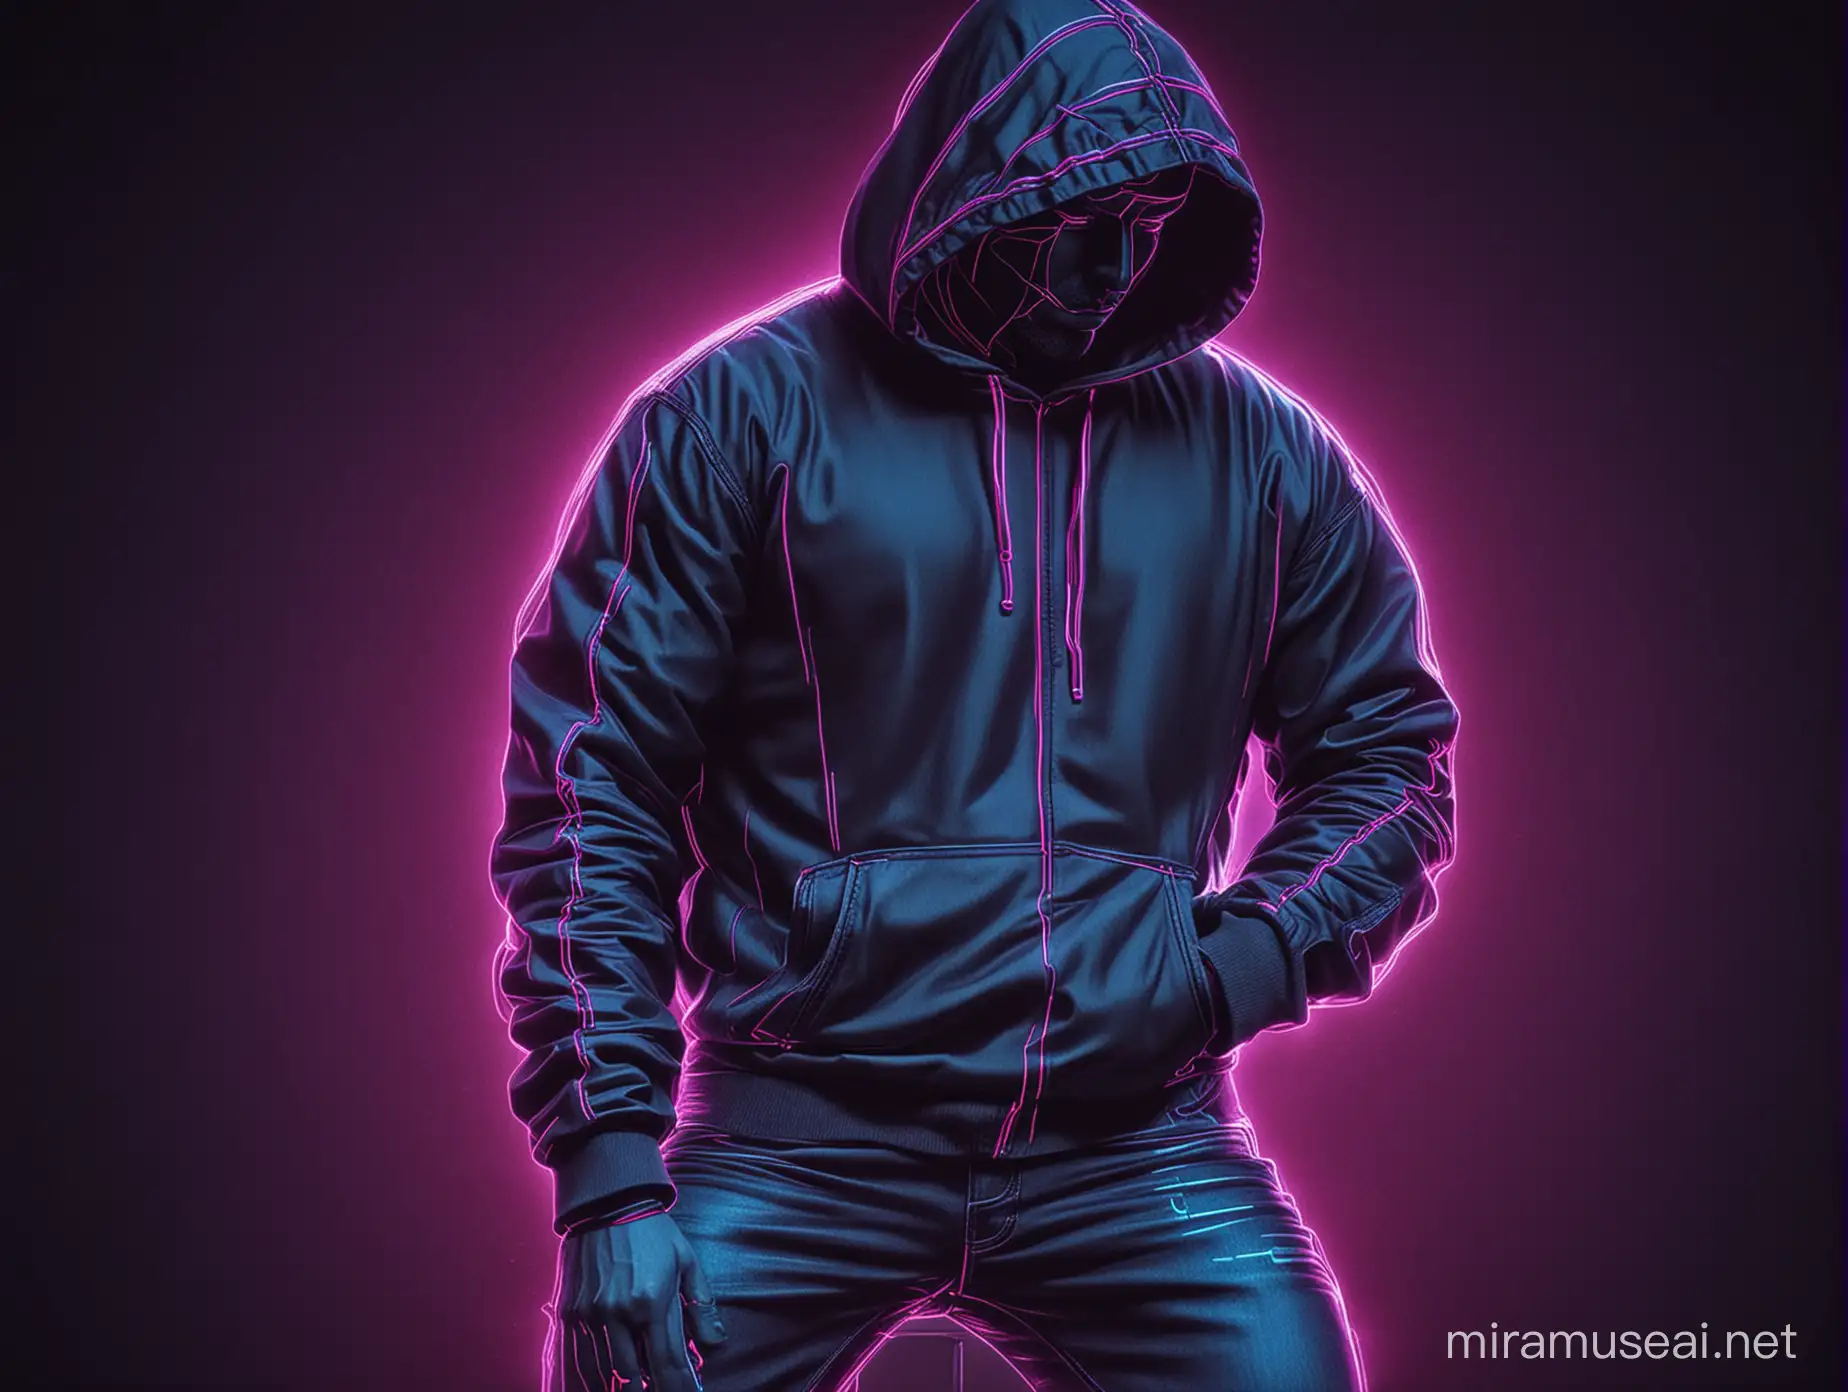 create a figure of a man in jeans and a hoodie using thin neon lines on a dark background, in synthwave style